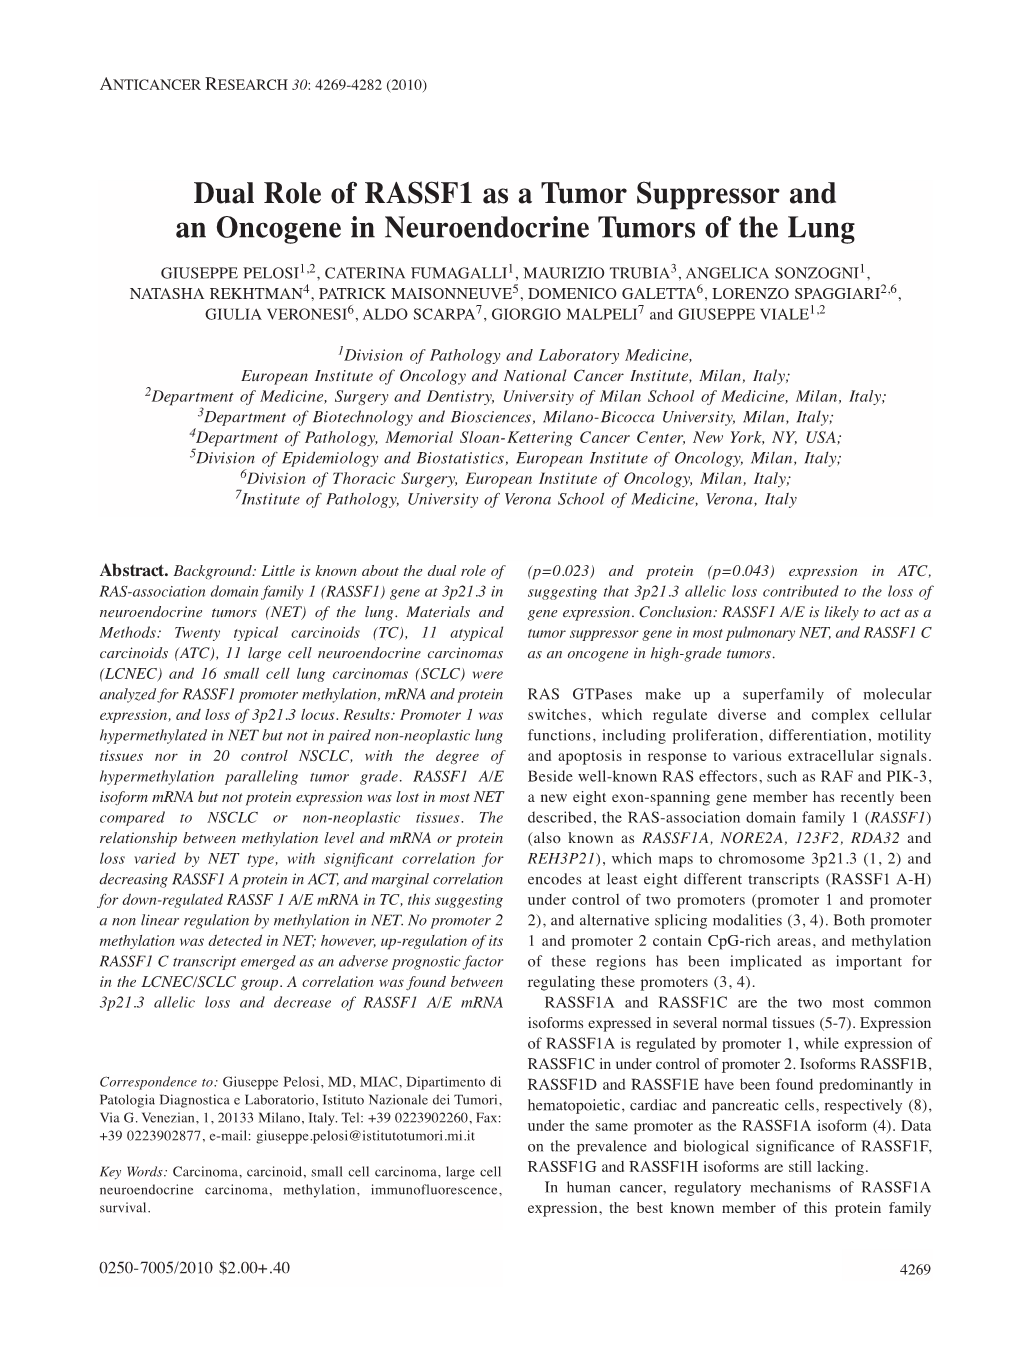 Dual Role of RASSF1 As a Tumor Suppressor and an Oncogene in Neuroendocrine Tumors of the Lung